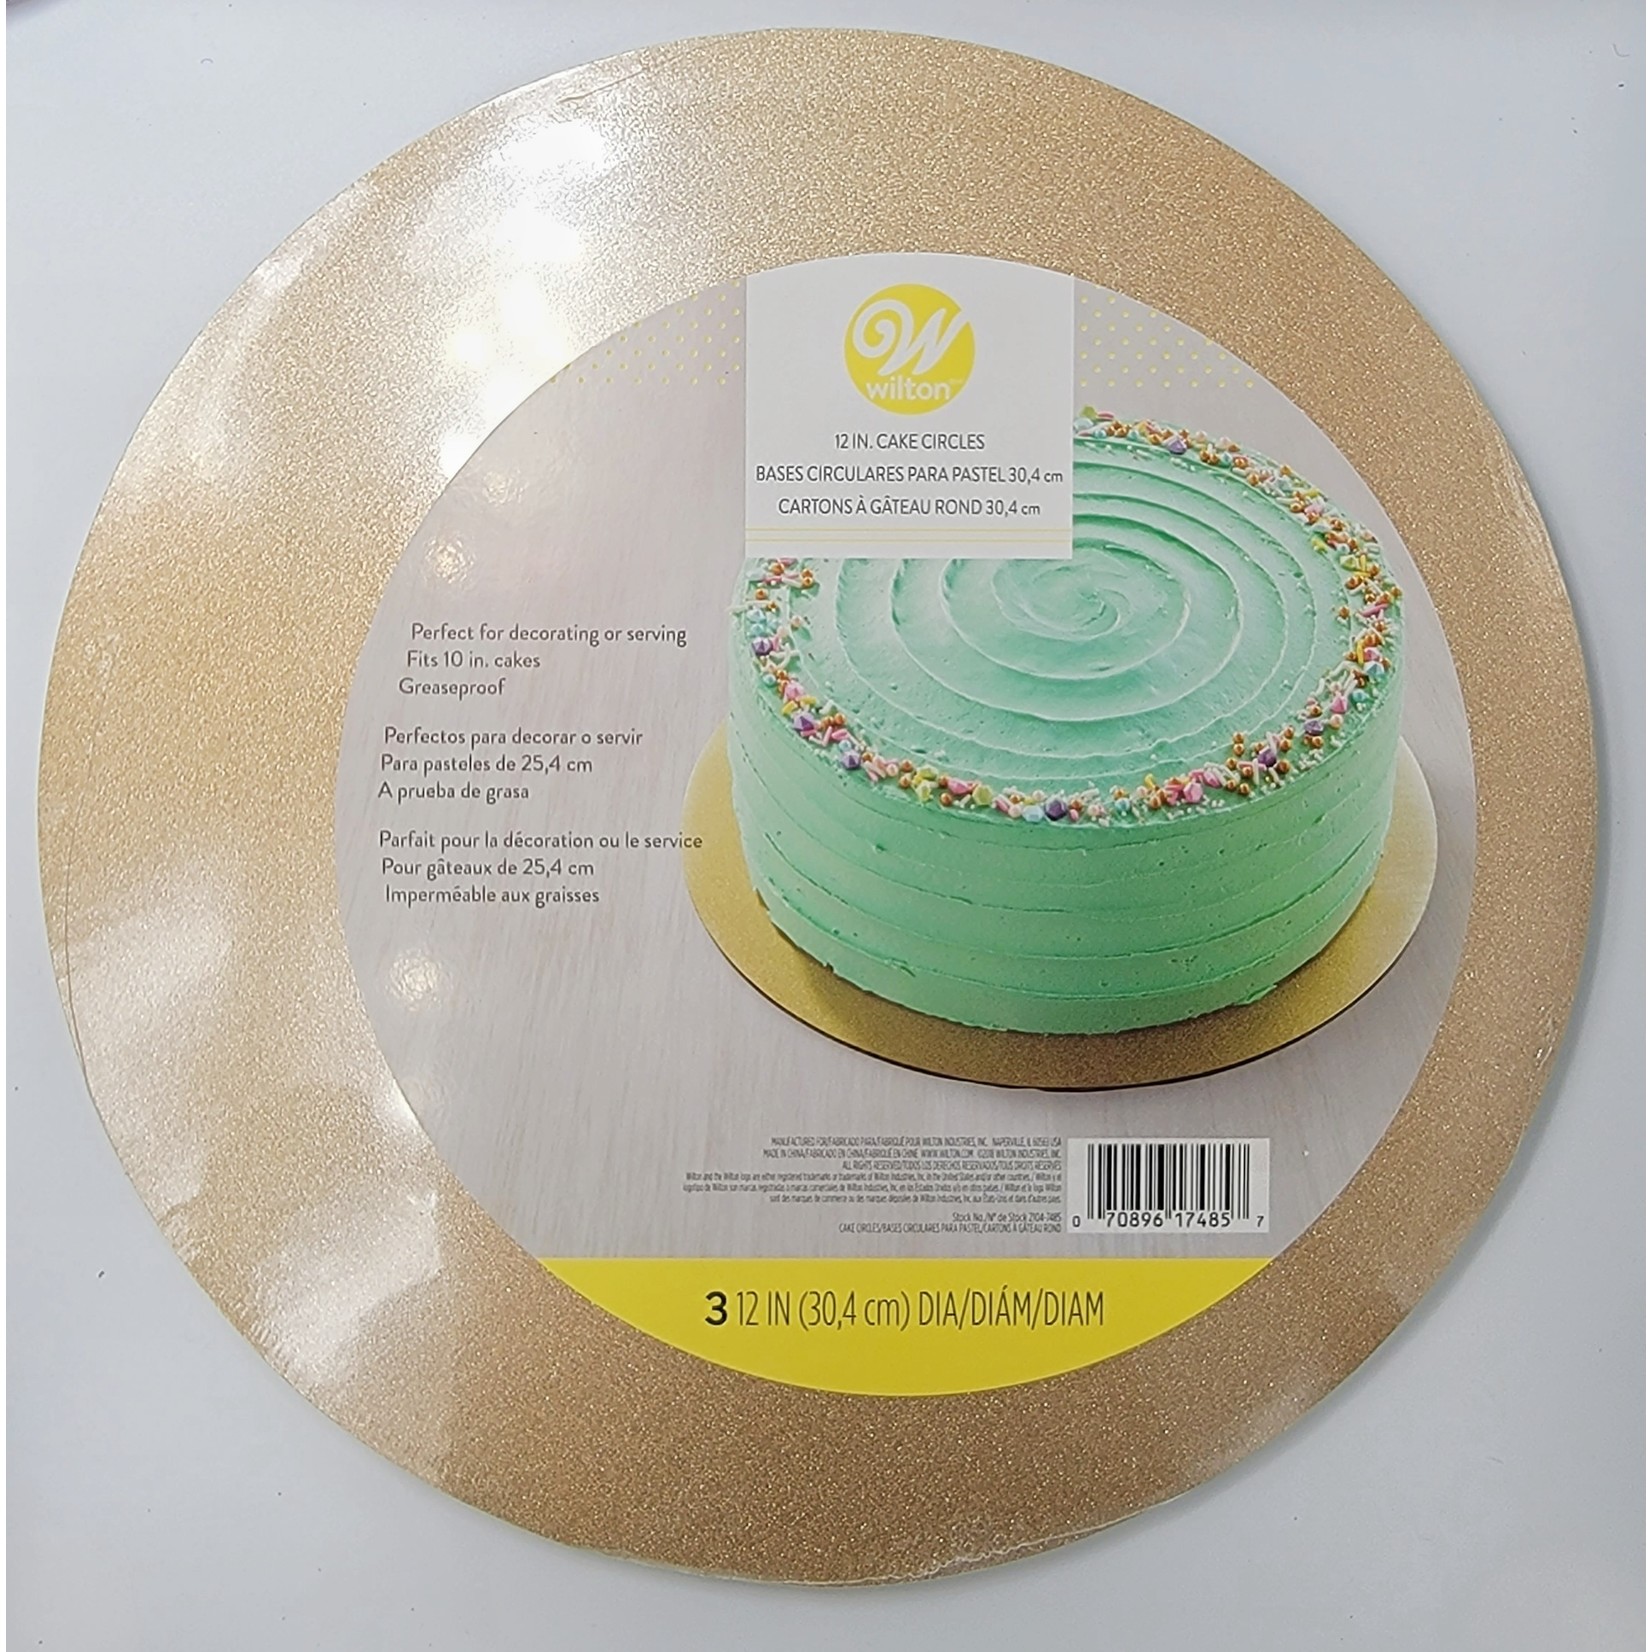 ZYJC Dessert Mousse Thicken Freezer-Durable Golden Grease-Proof Paper Plates  Display Tray Cardboard Cake Boards | Lazada PH